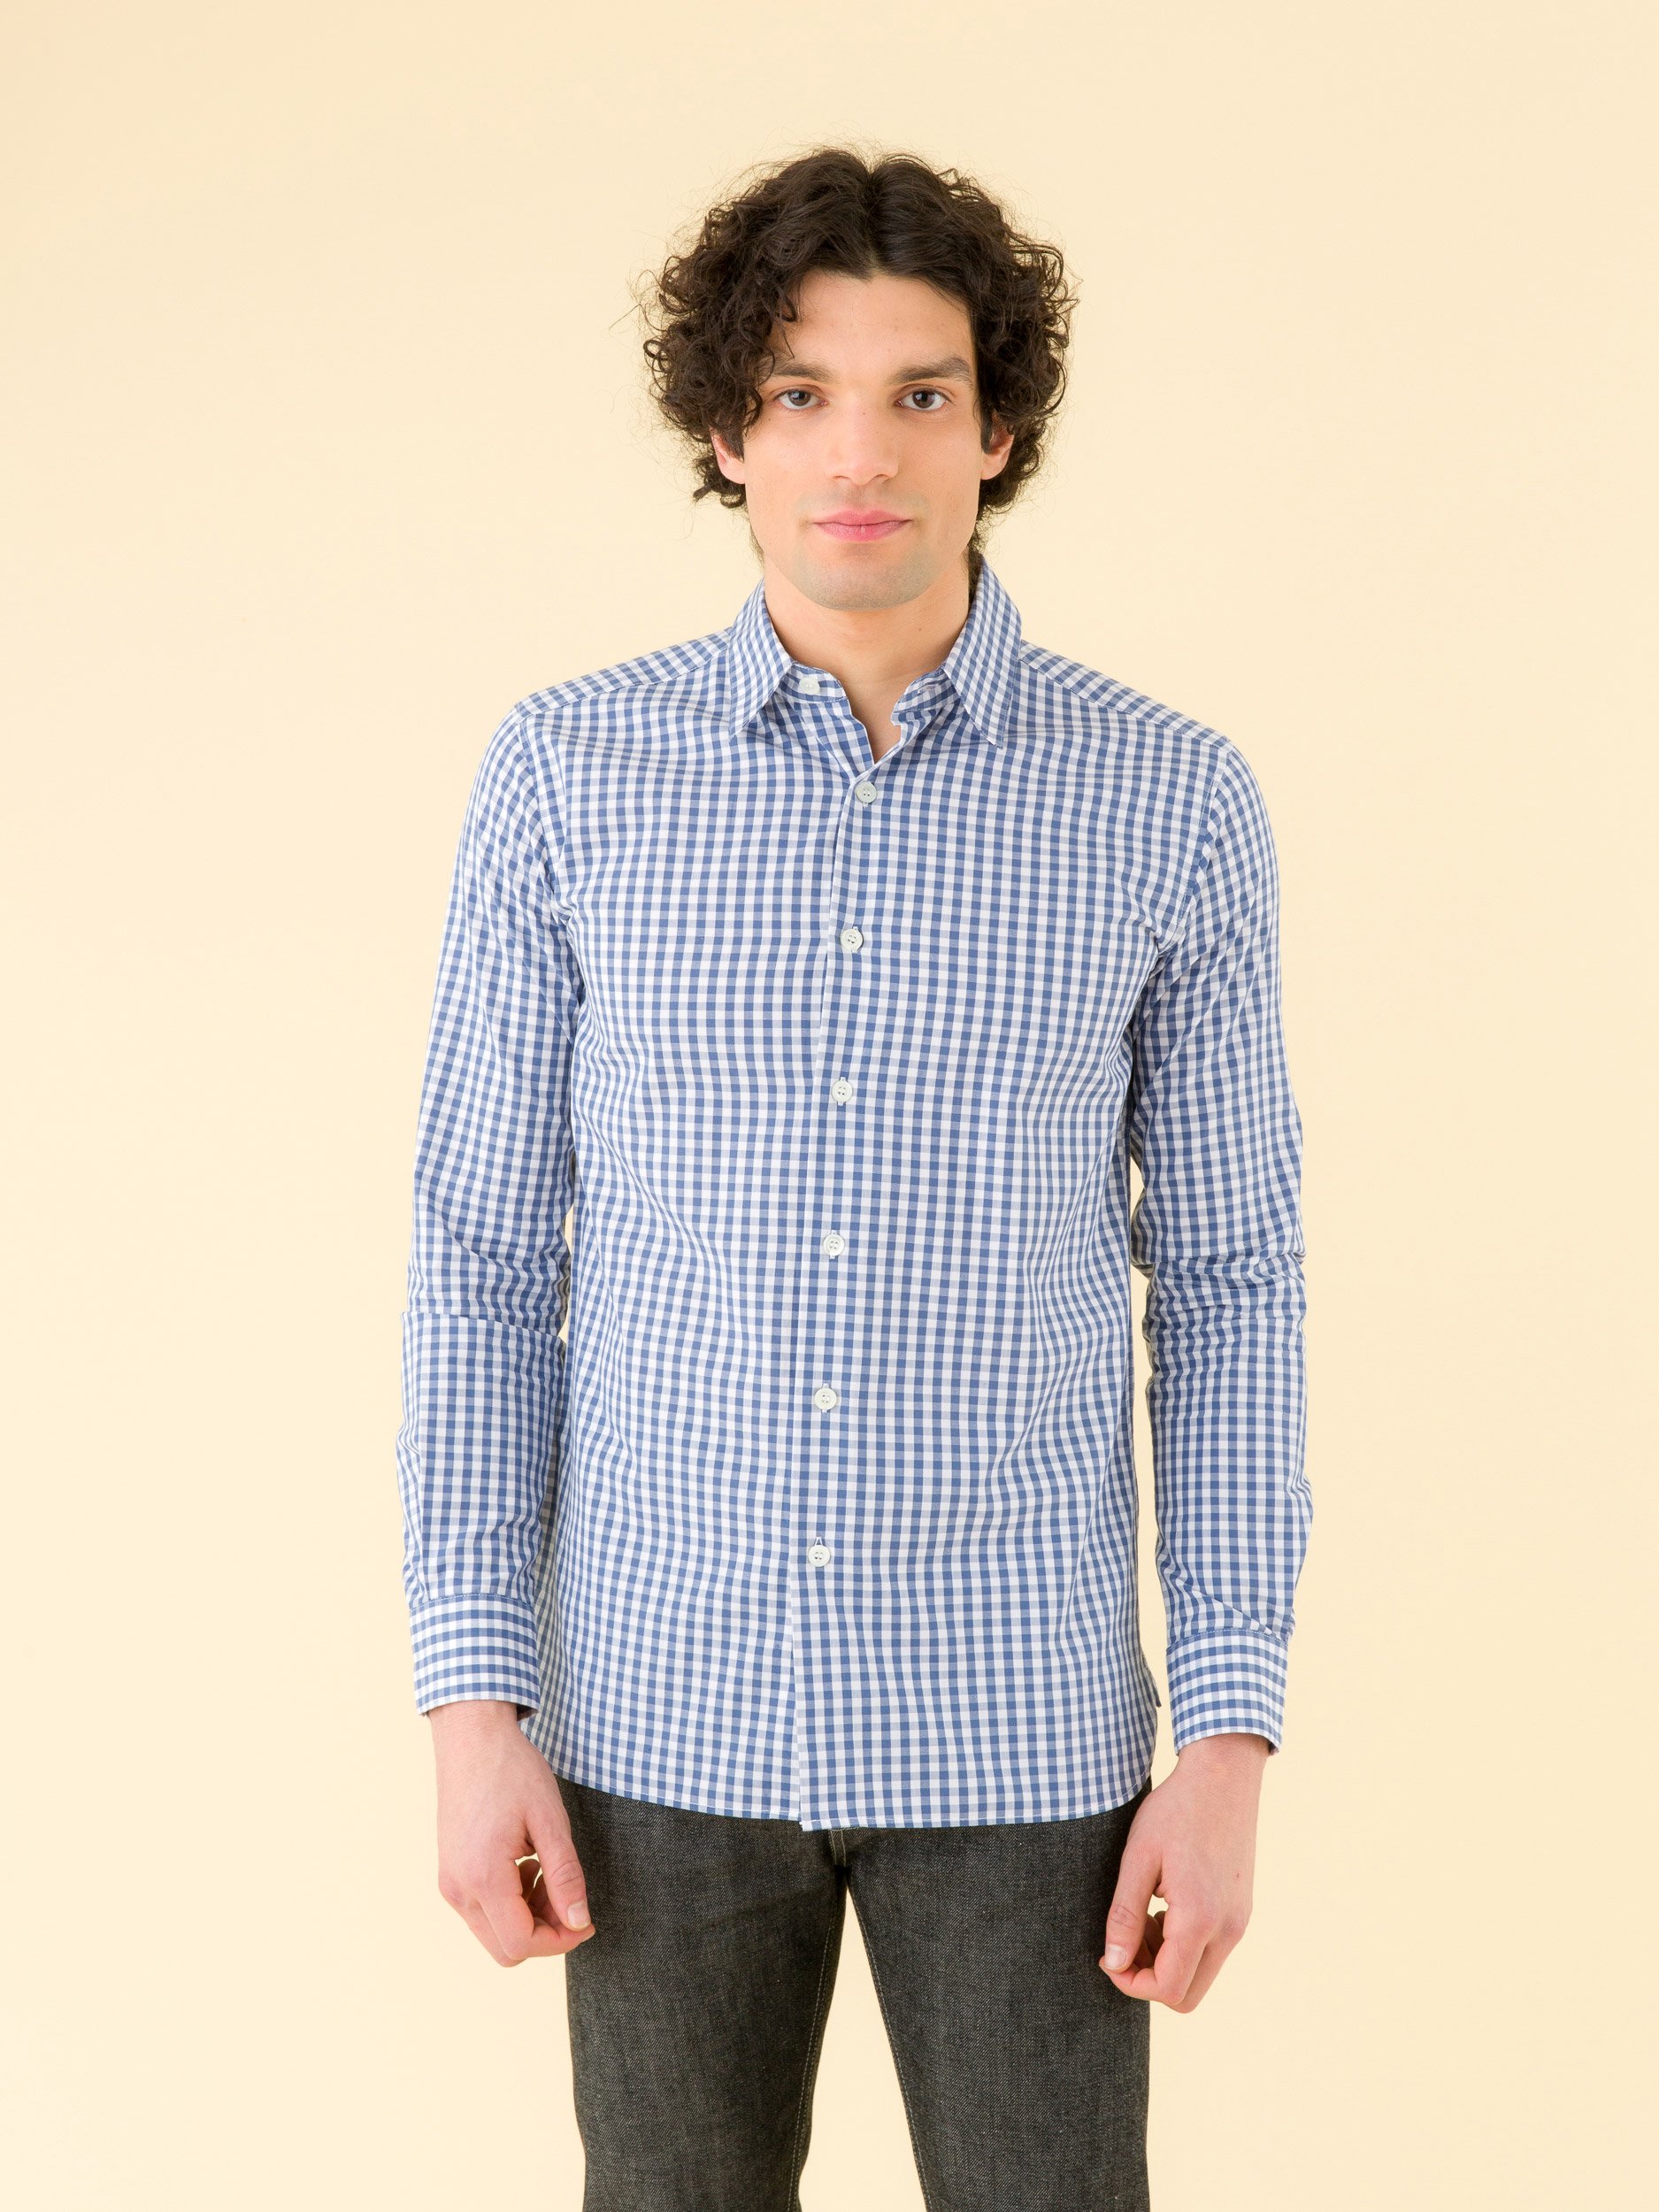 Men's Shirts - Trendy Shirts for Men Online in India | Numero Uno-nttc.com.vn